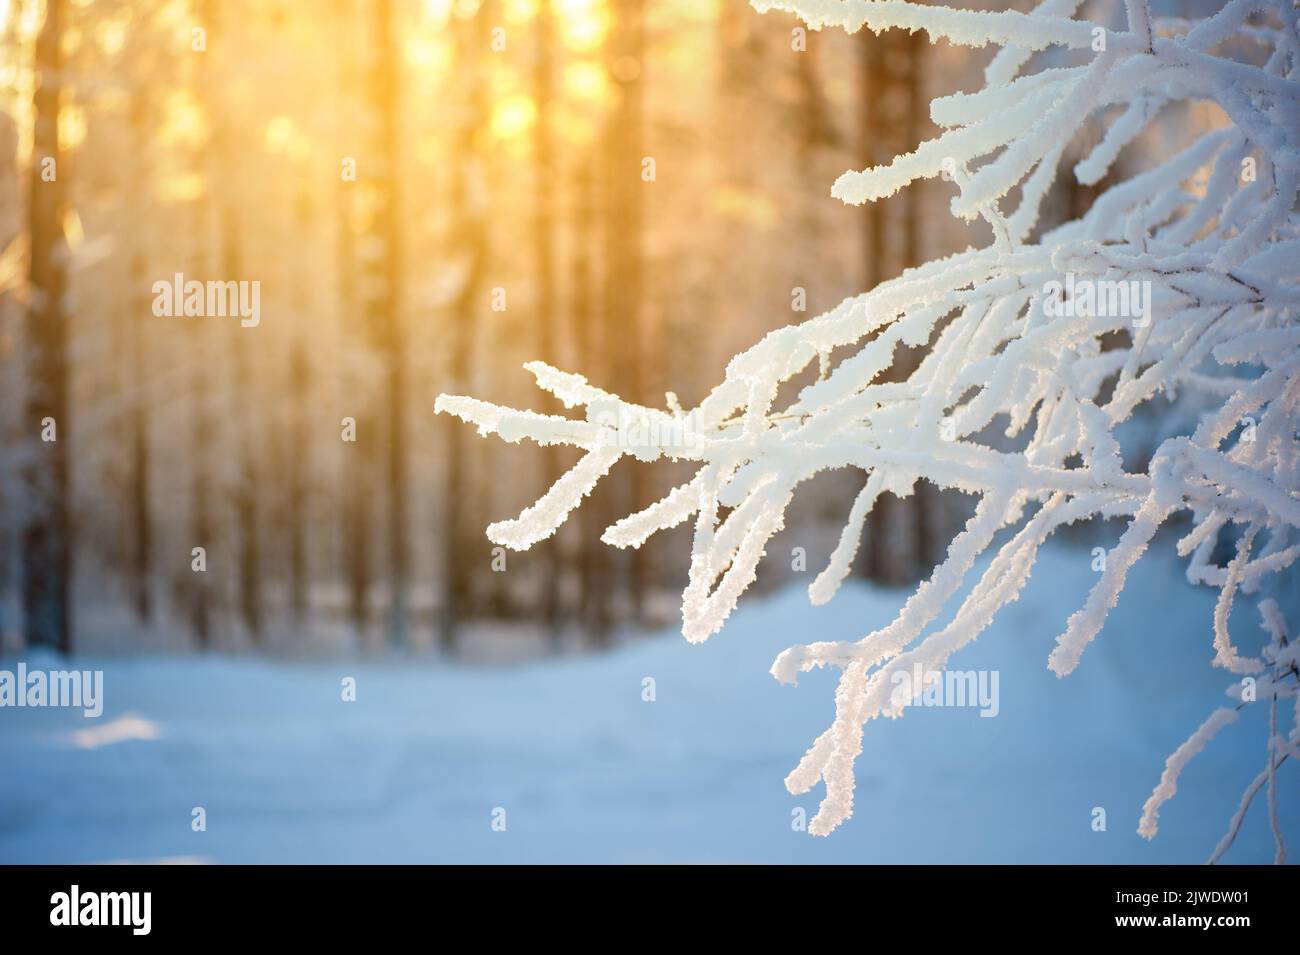 Snowy birch tree branch against blurred winter forest and sunlight in the background. Stock Photo